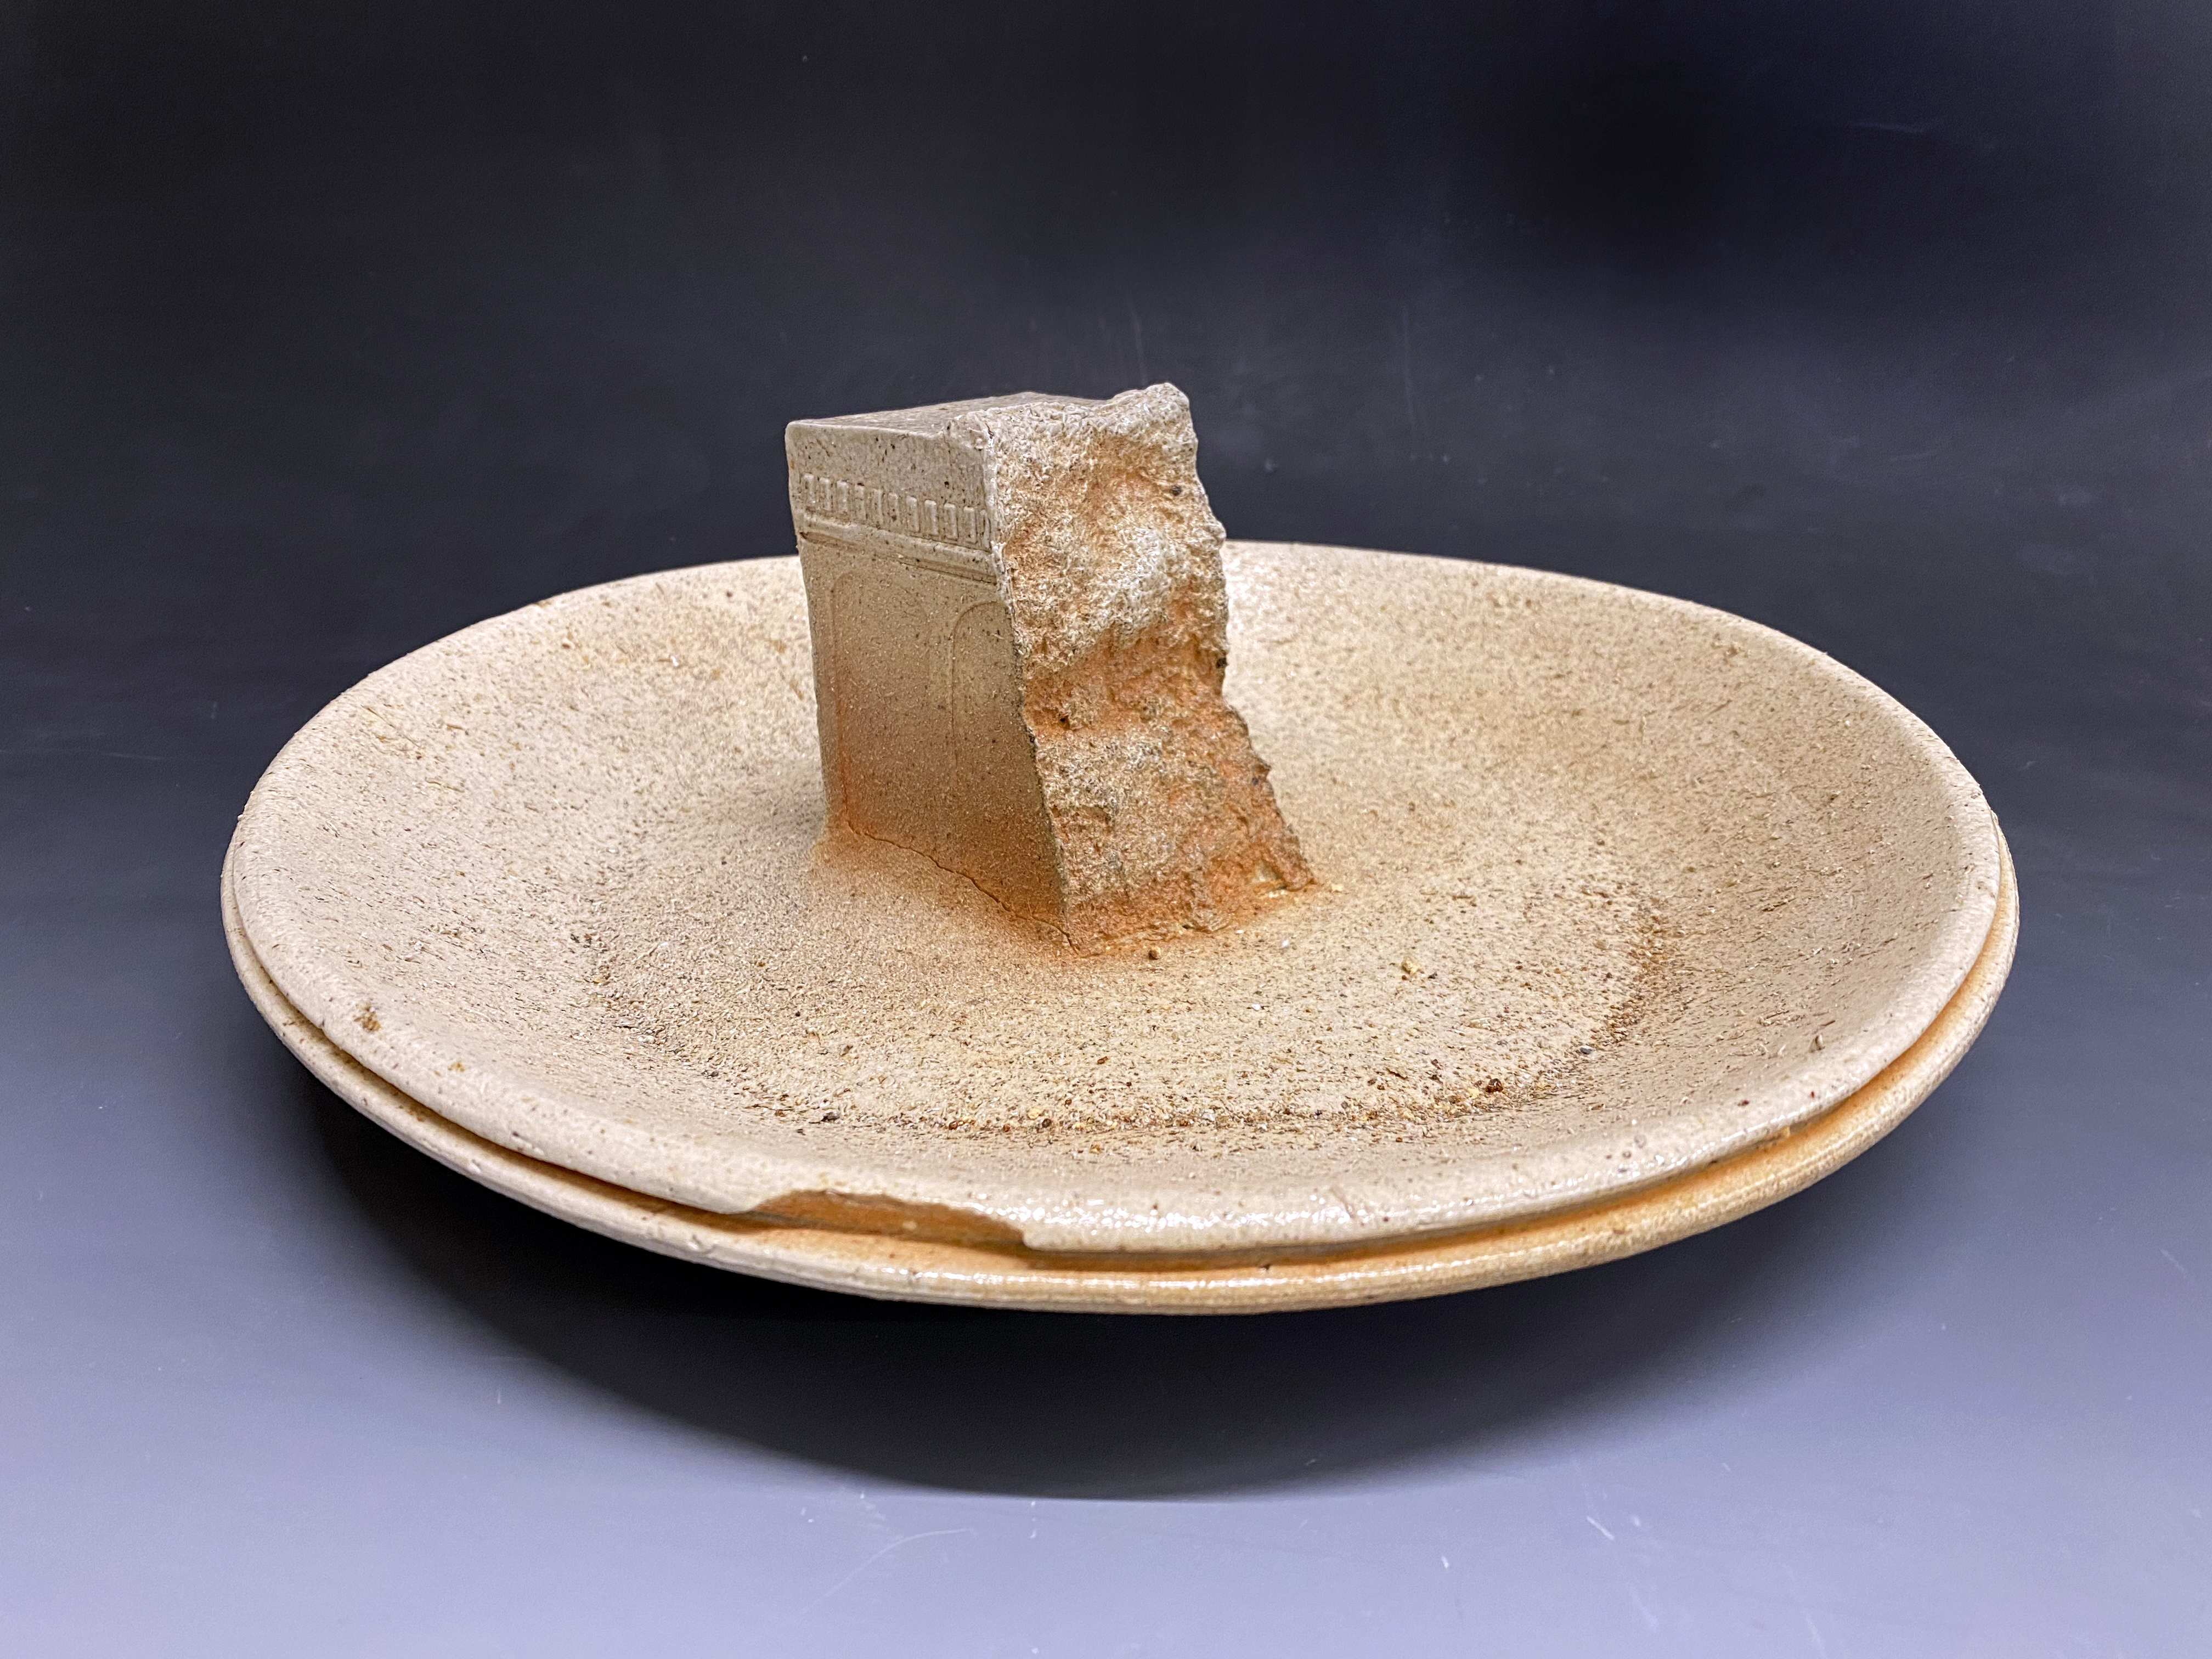 An abstract ceramic sculpture featuring a platter with a protrusion sticking up from the middle